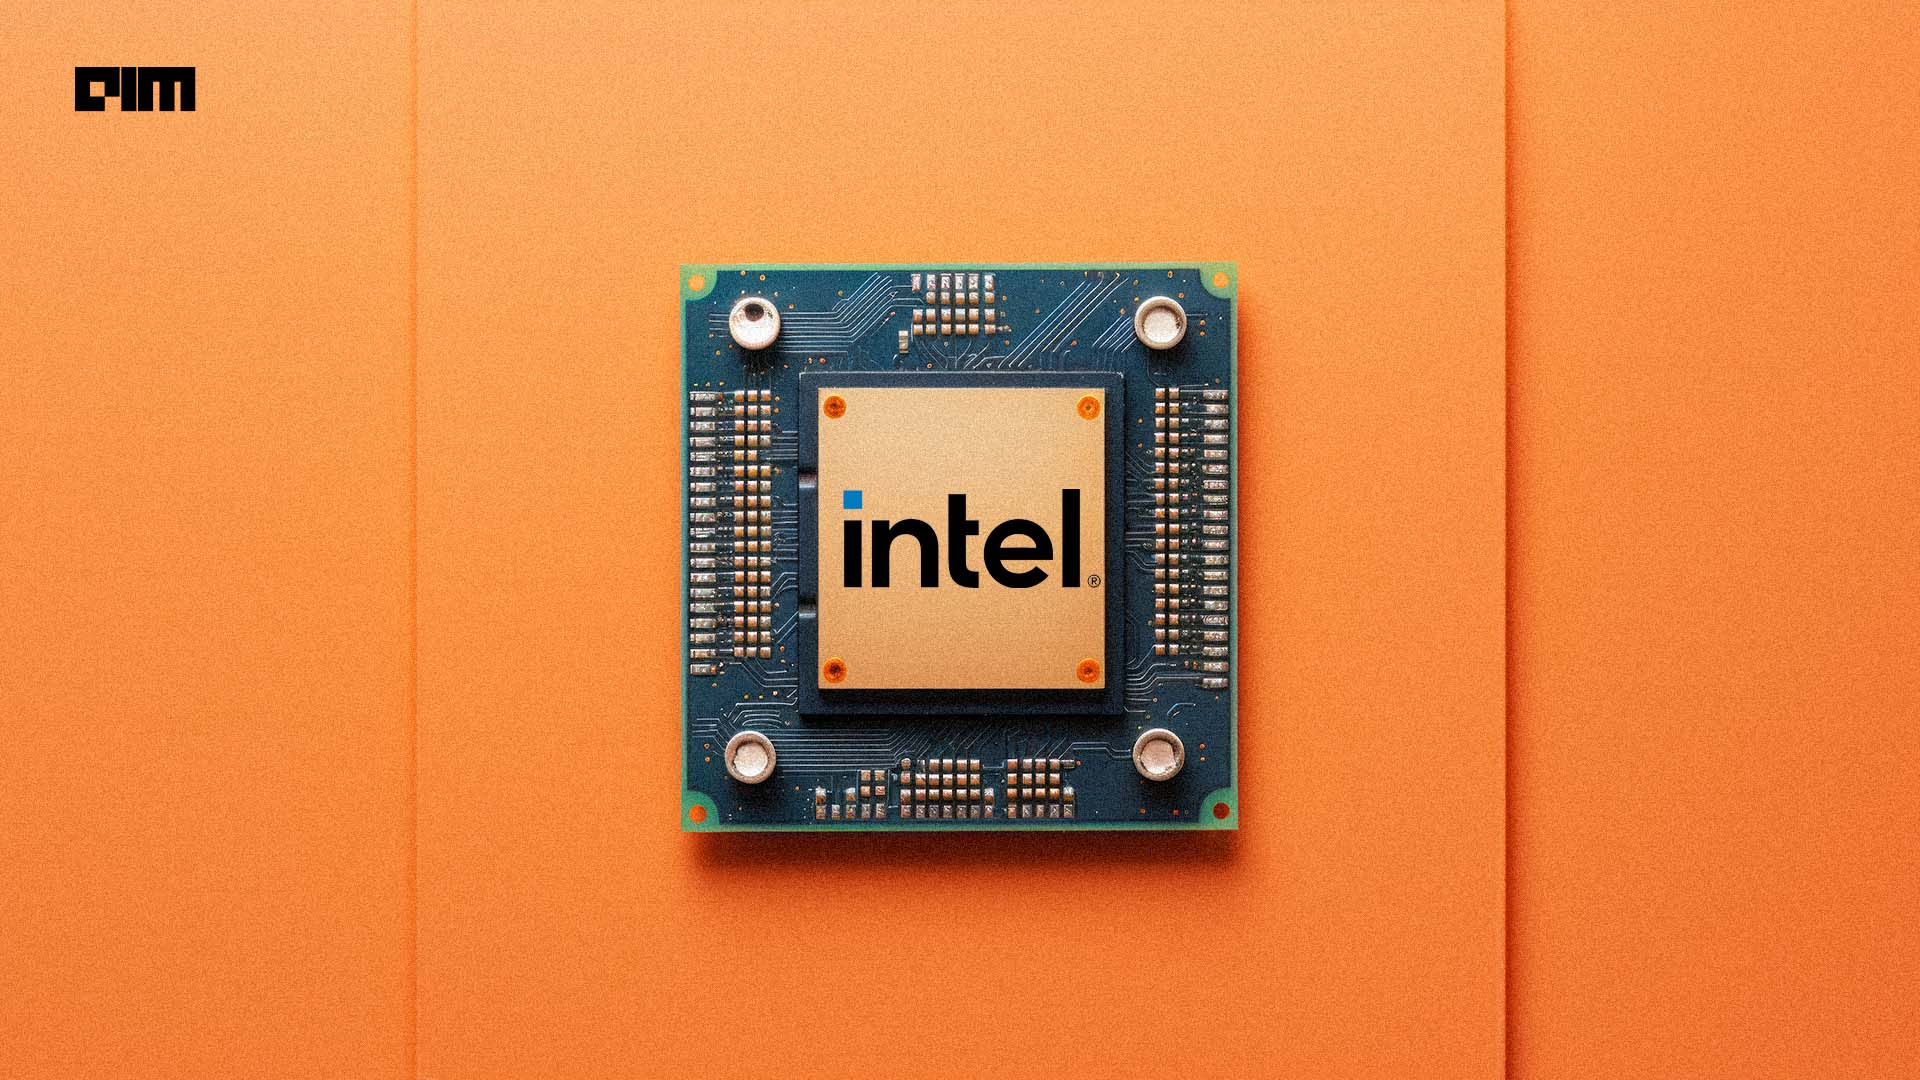 Intel Soon to be on Par with NVIDIA